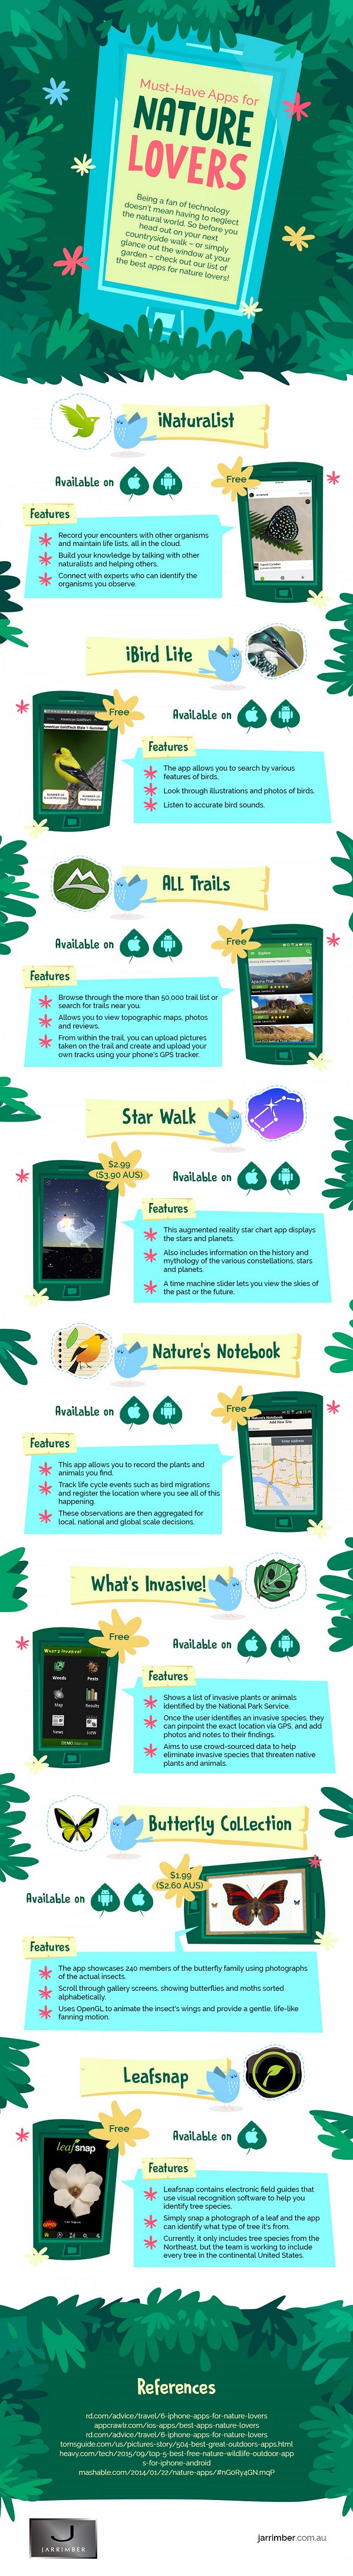 nature-lovers-apps